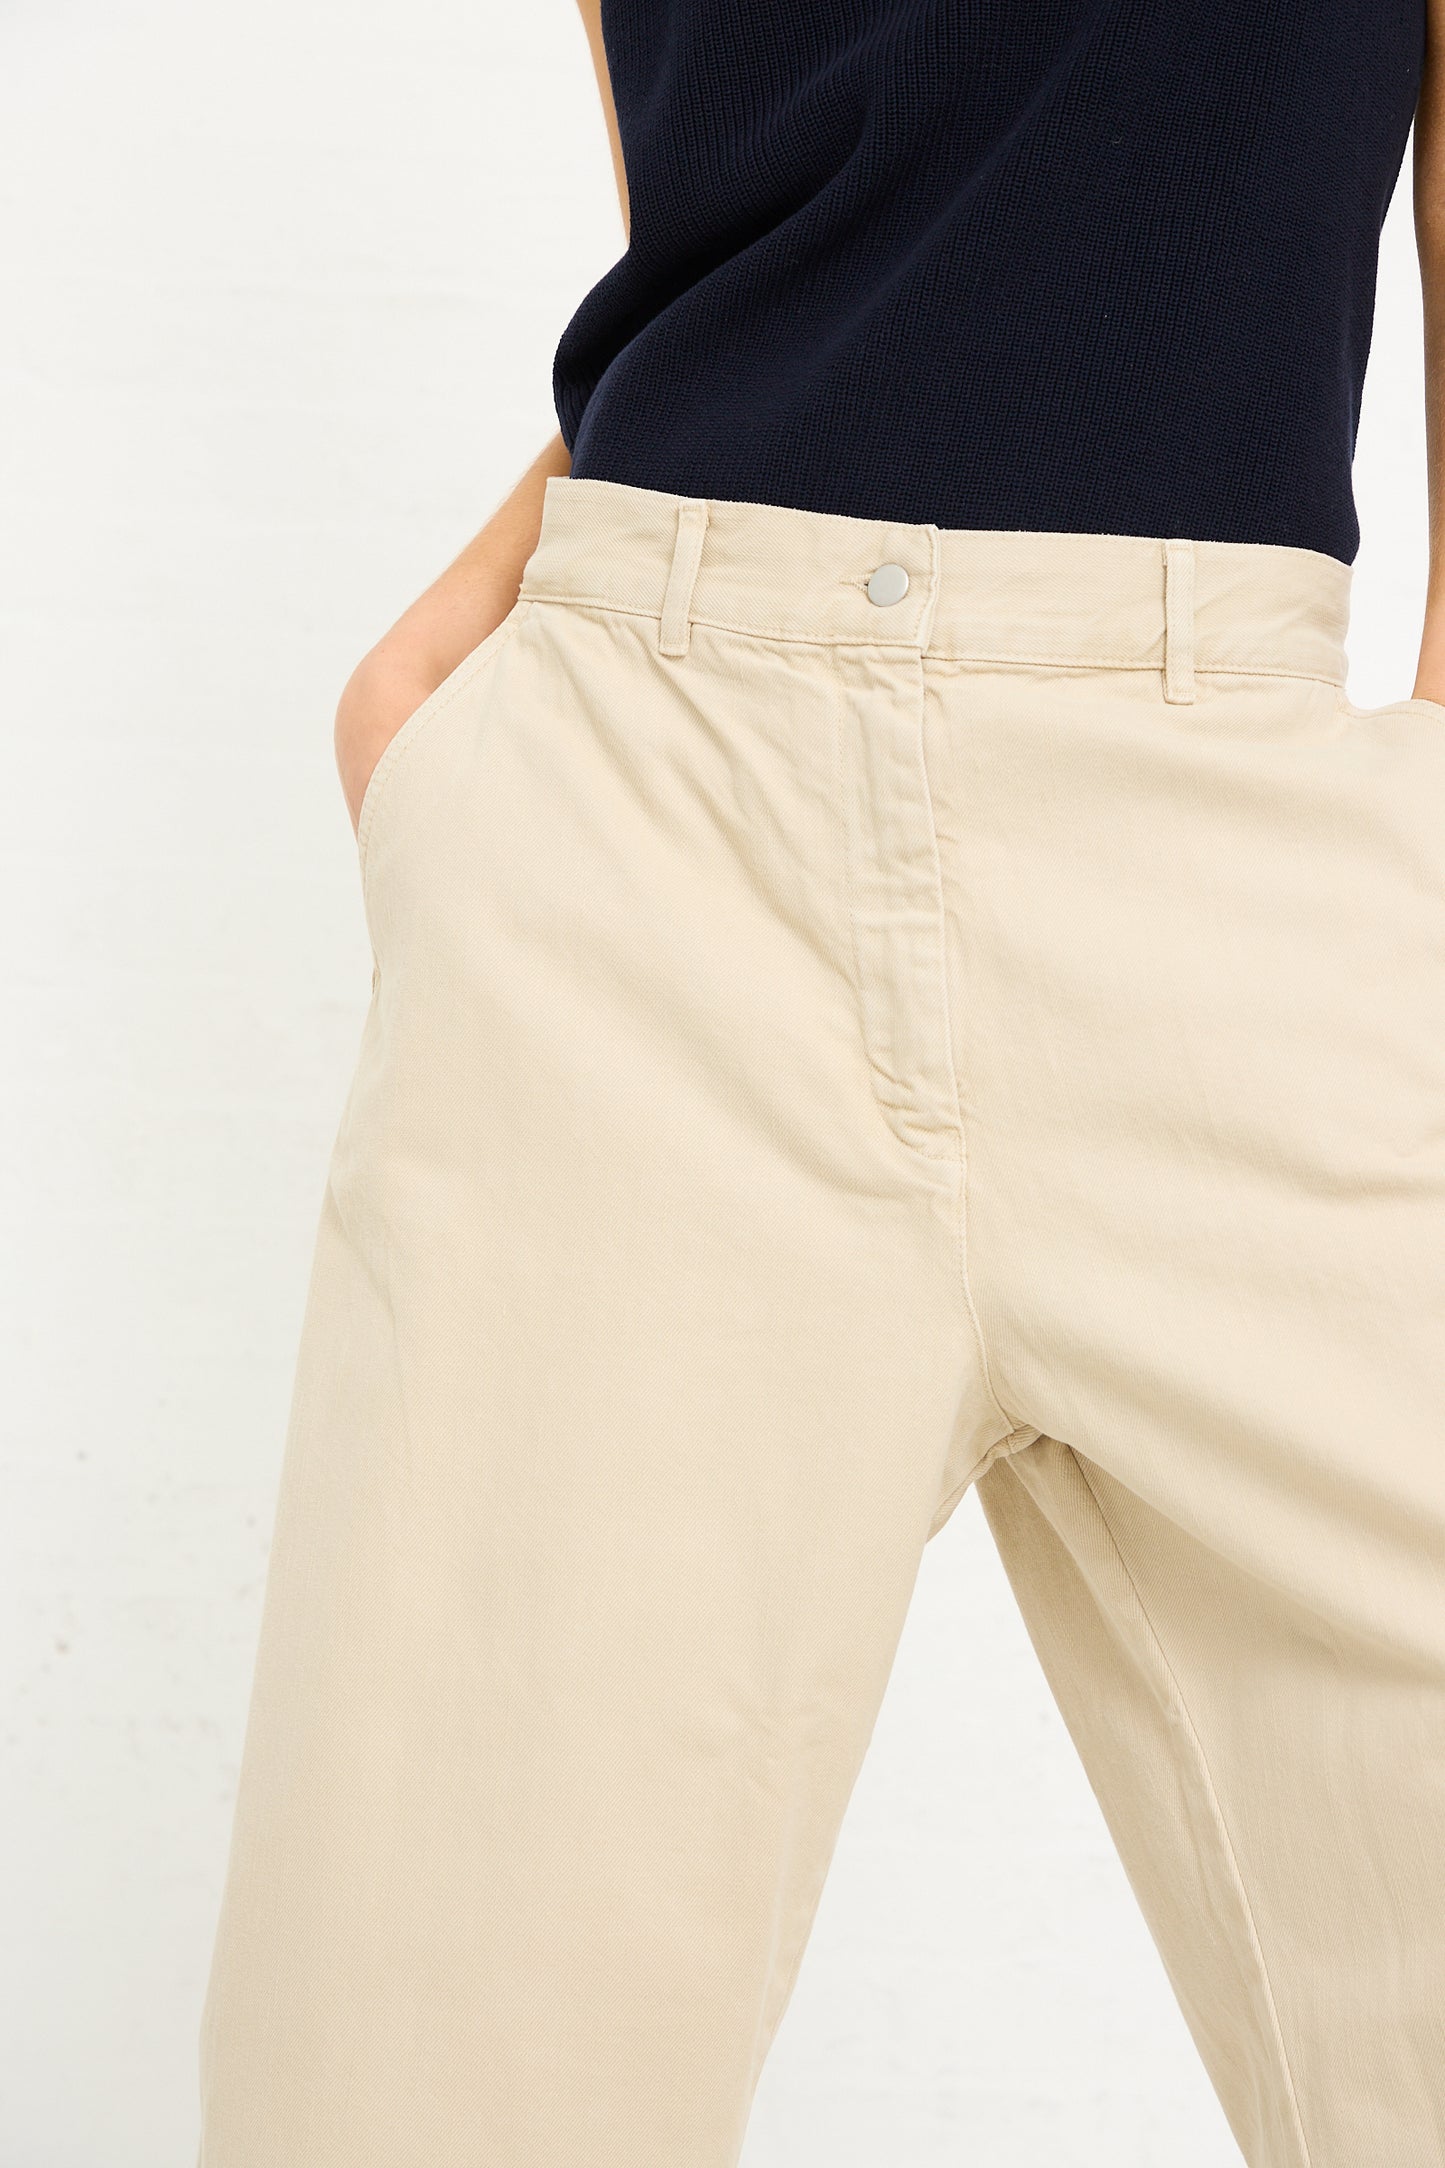 Close-up of a person wearing Studio Nicholson Denim Chalco Wide Crop Pant in Dove and a dark navy top, focusing on the button and pocket detail.